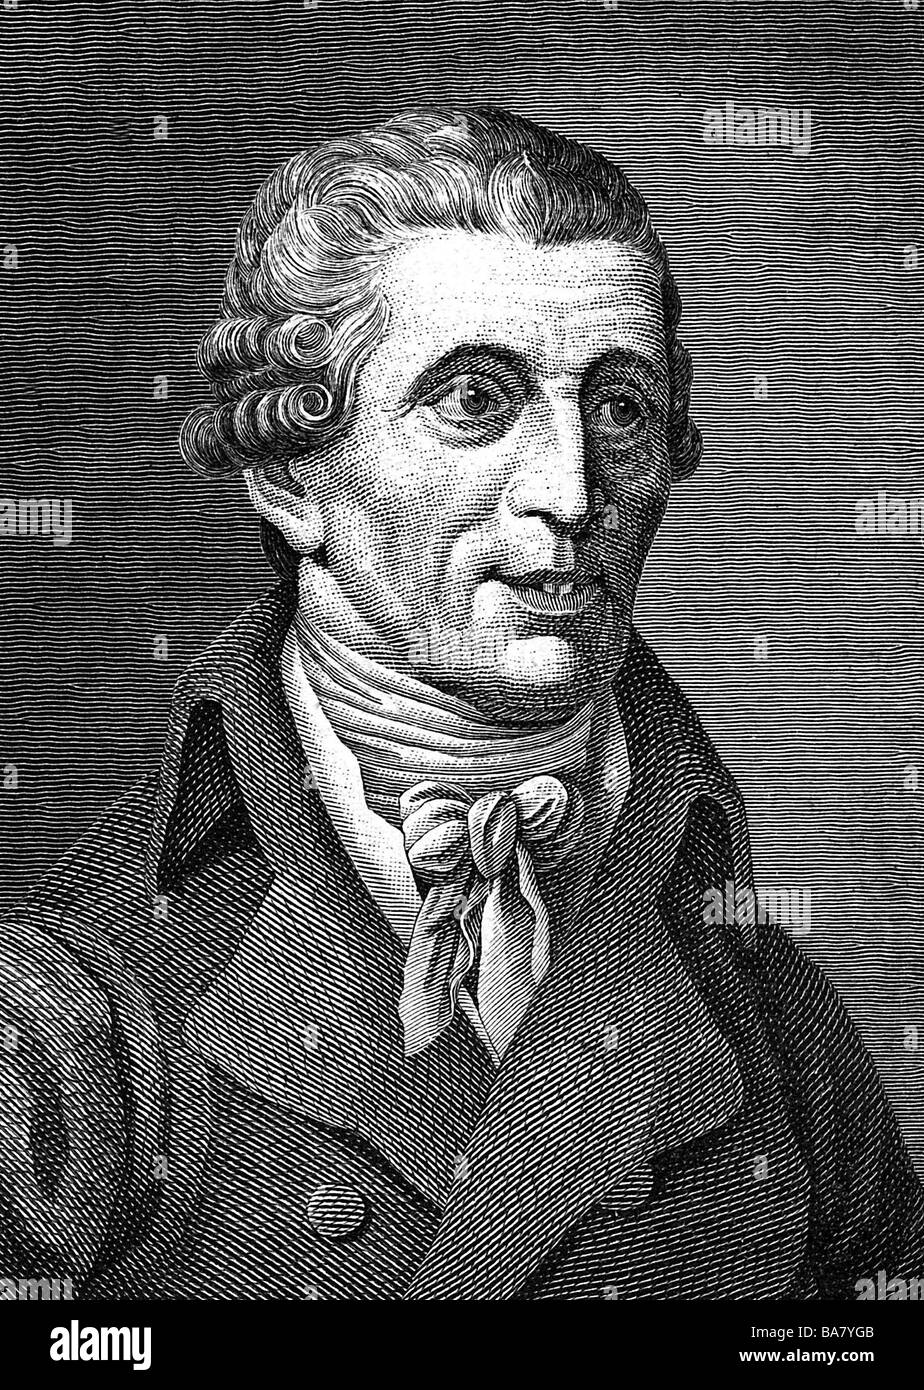 Haydn, Joseph, 31.3.1732 - 31.5.1809, Austrian musician (composer), portrait, by F. Müller, wood engraving, 19th century, Stock Photo